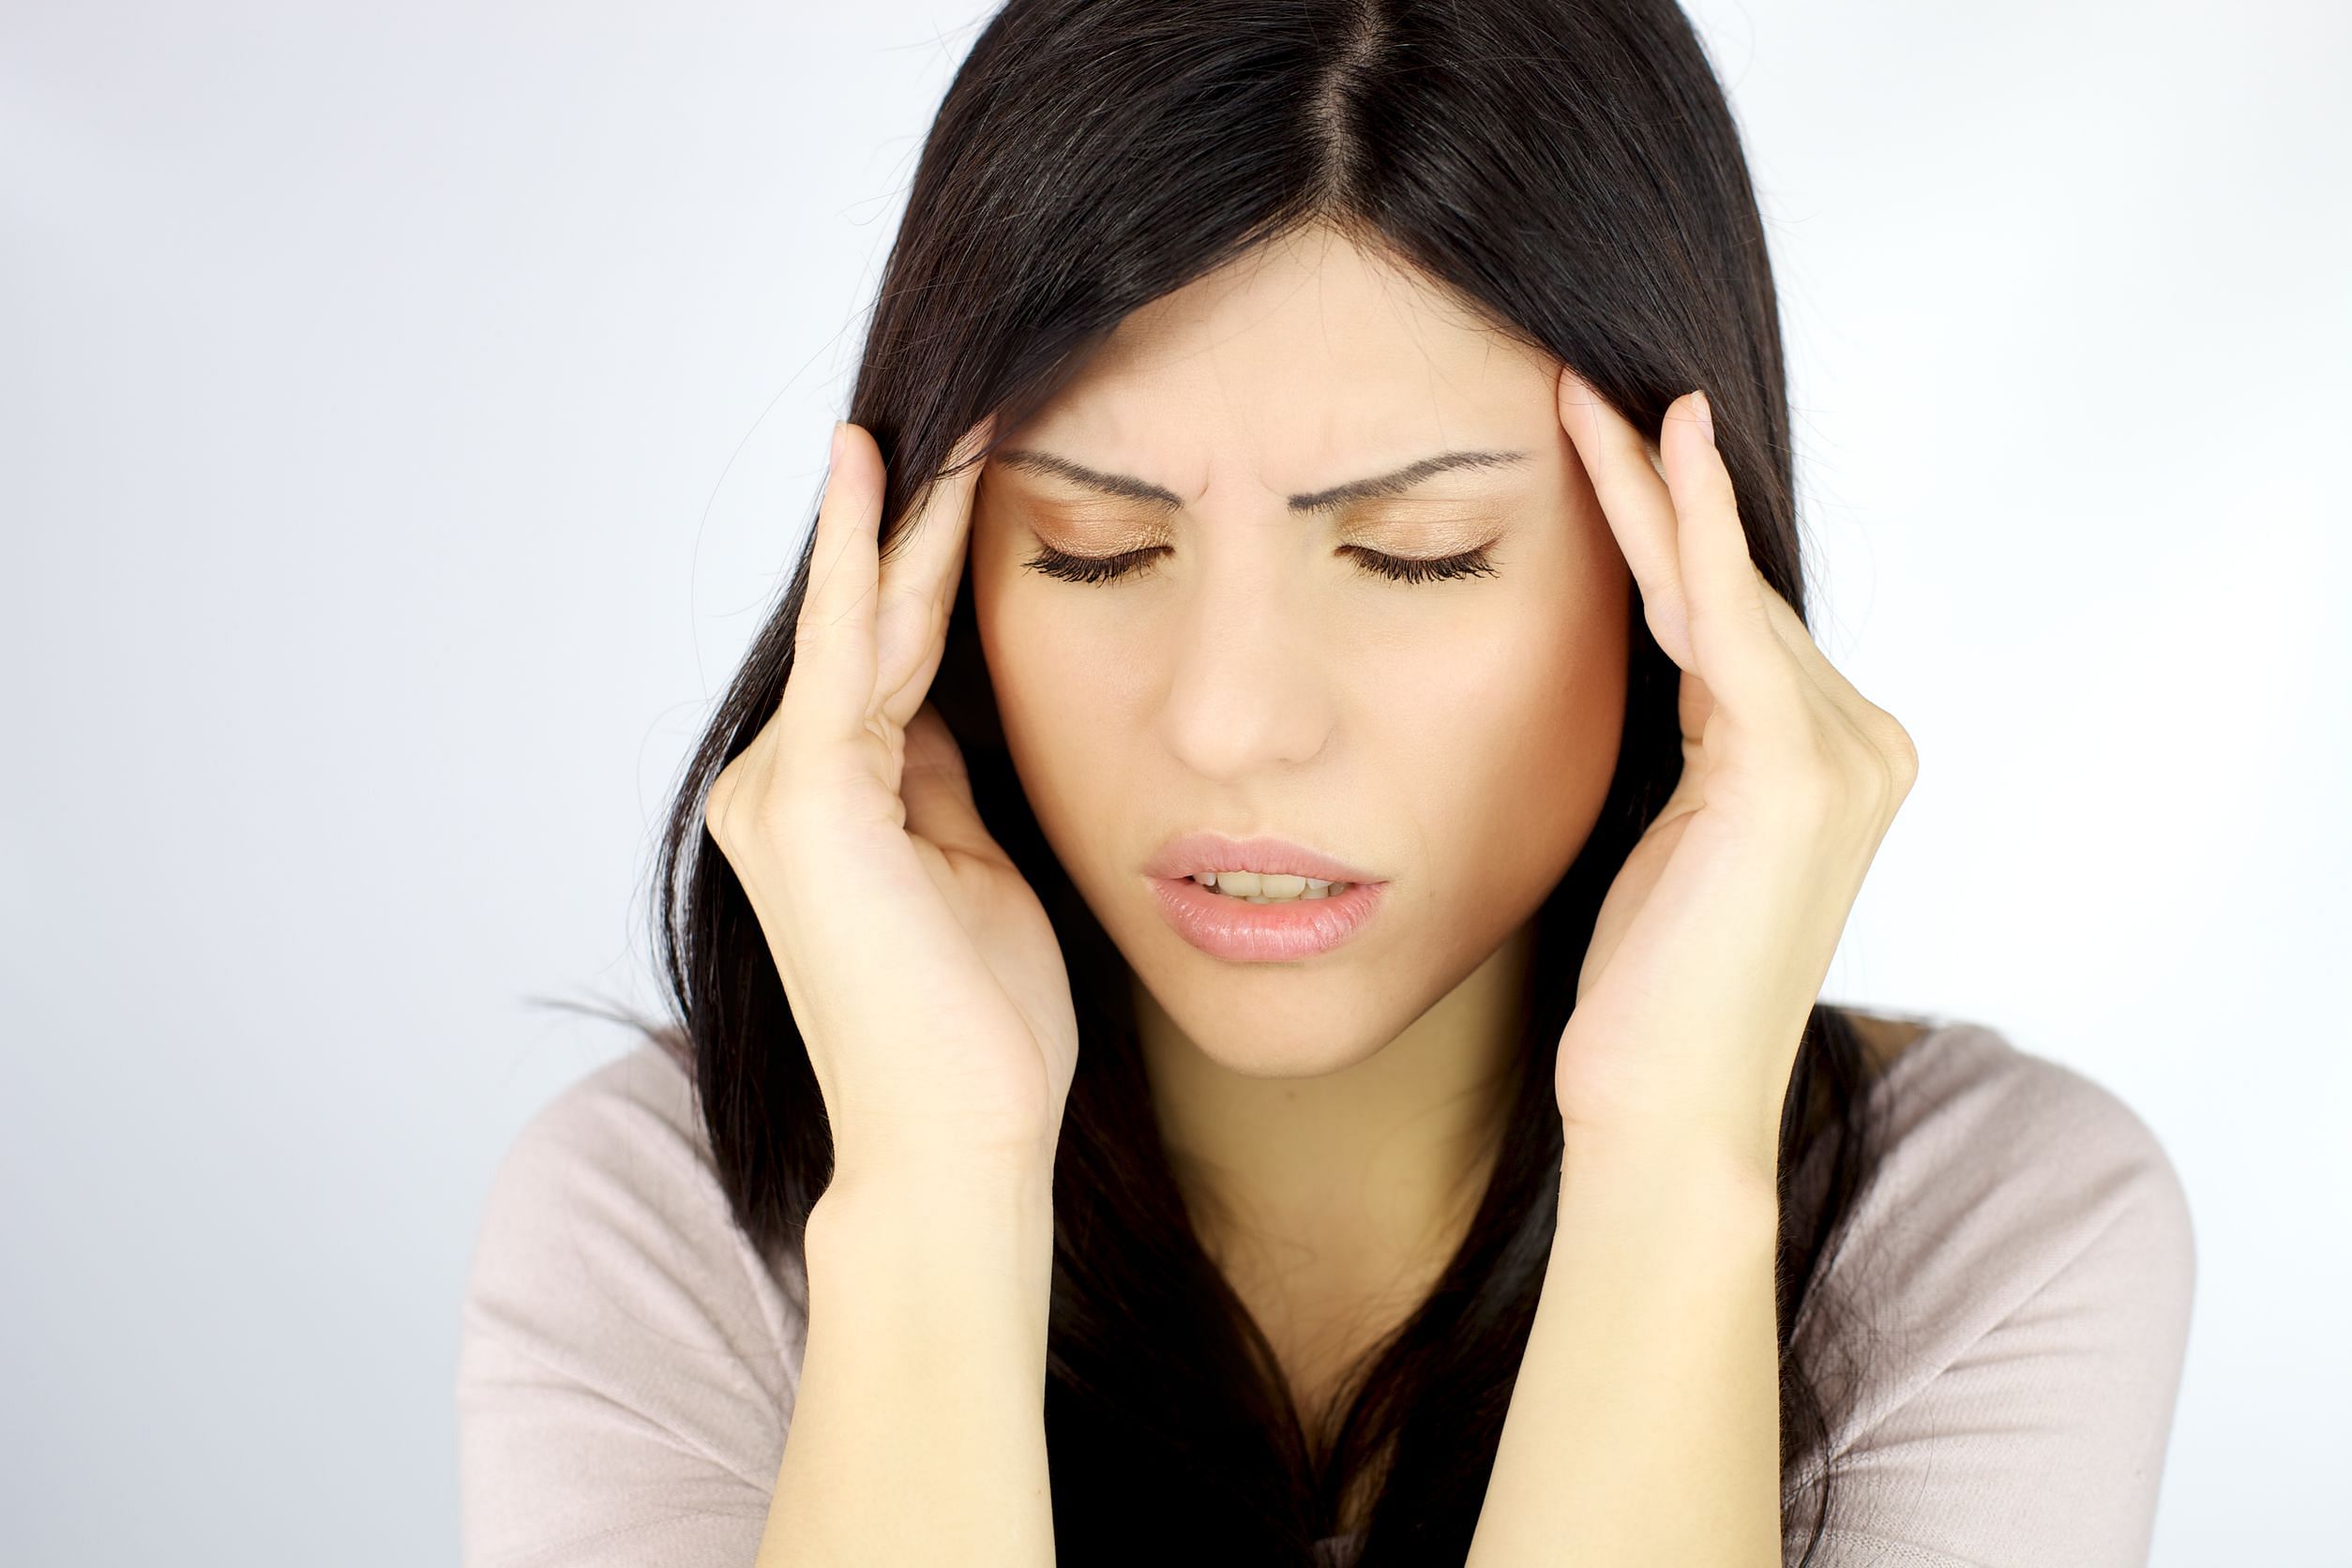 How traditional Chinese medicine can help your headaches